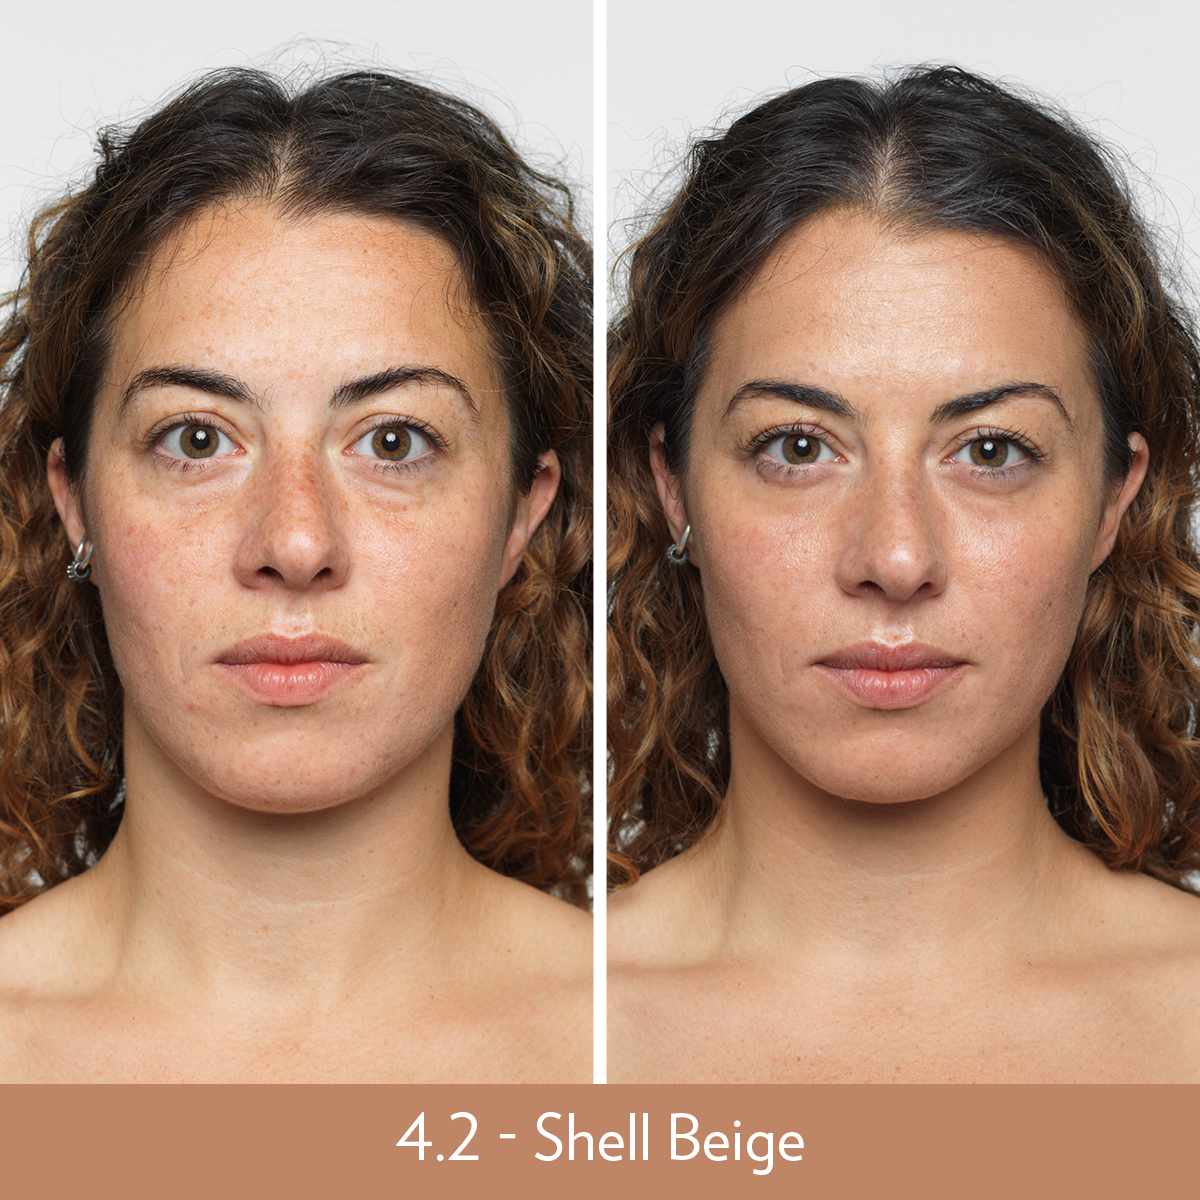 Nu Skin BB+ Skin Loving Foundation 4.2 Shell Beige Before and After